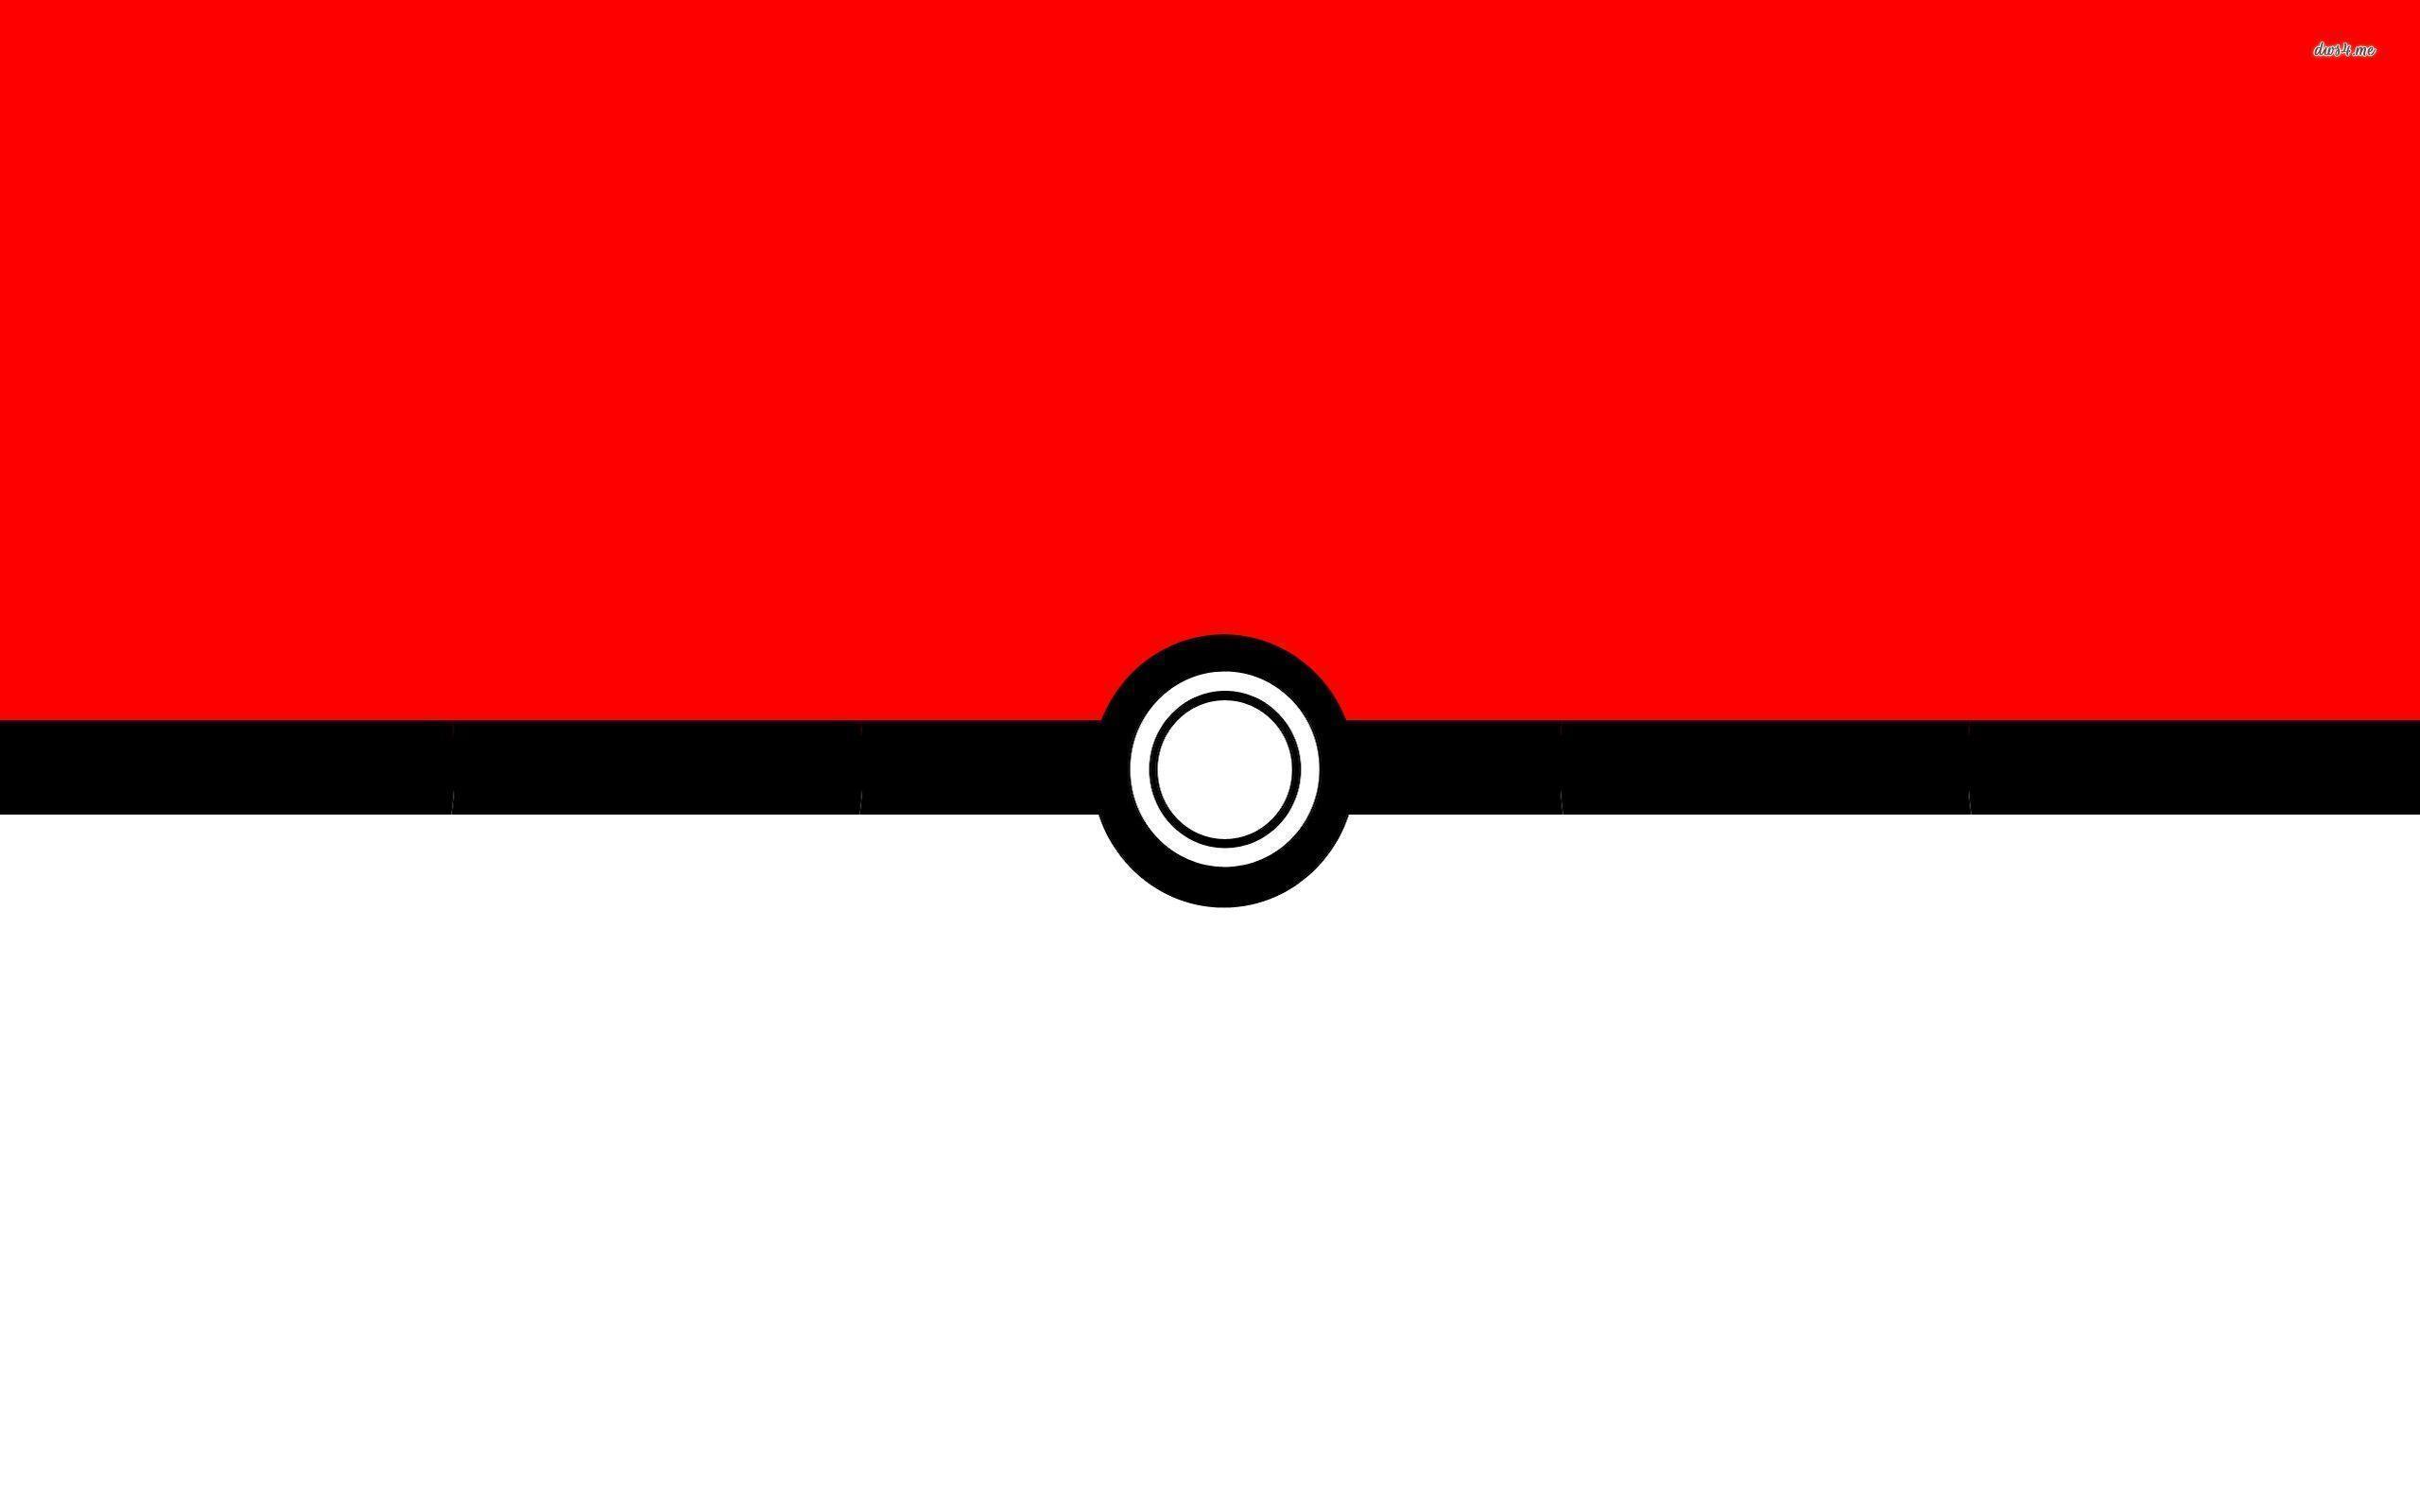 Video Game Pokémon GO HD Wallpaper by DrBoxHead